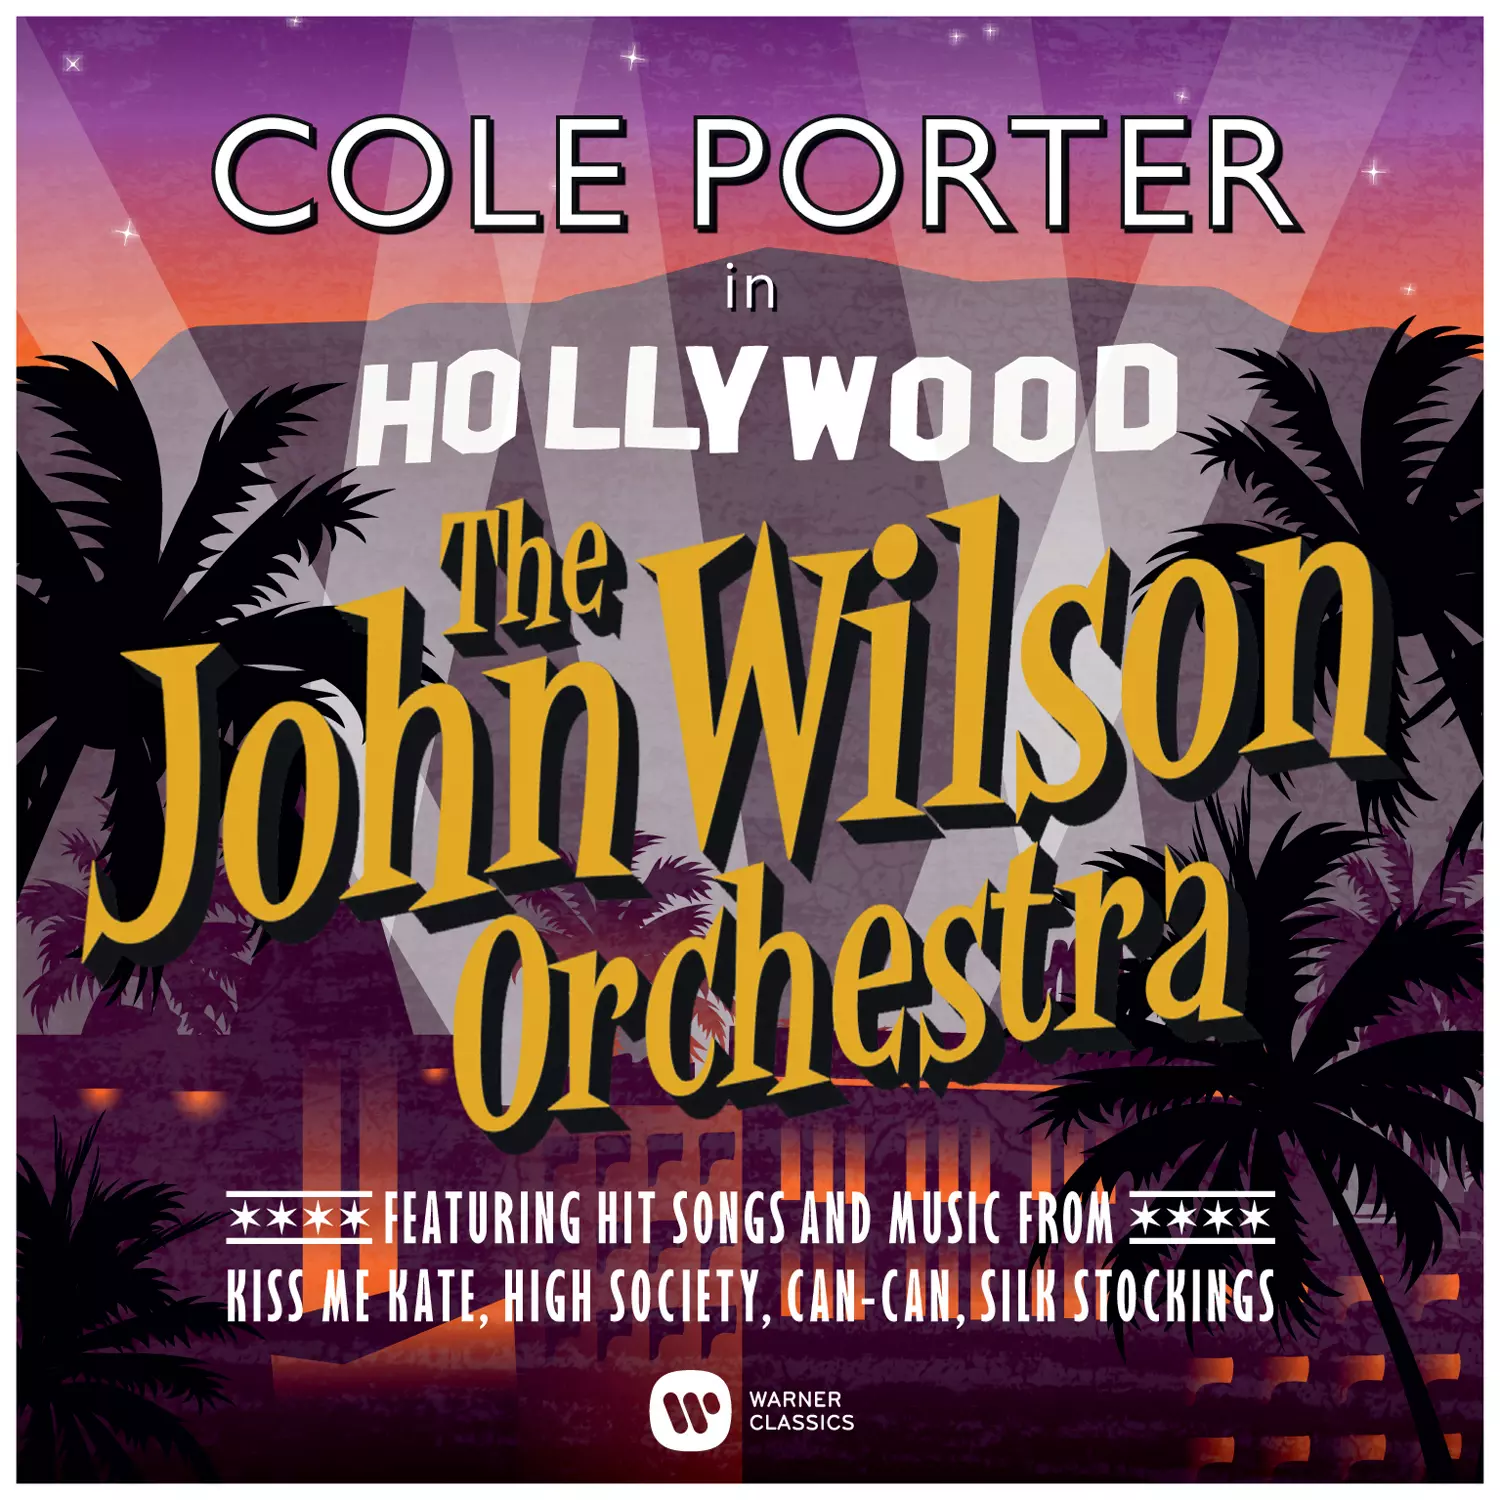 John Wilson Orchestra Cole Porter in Hollywood